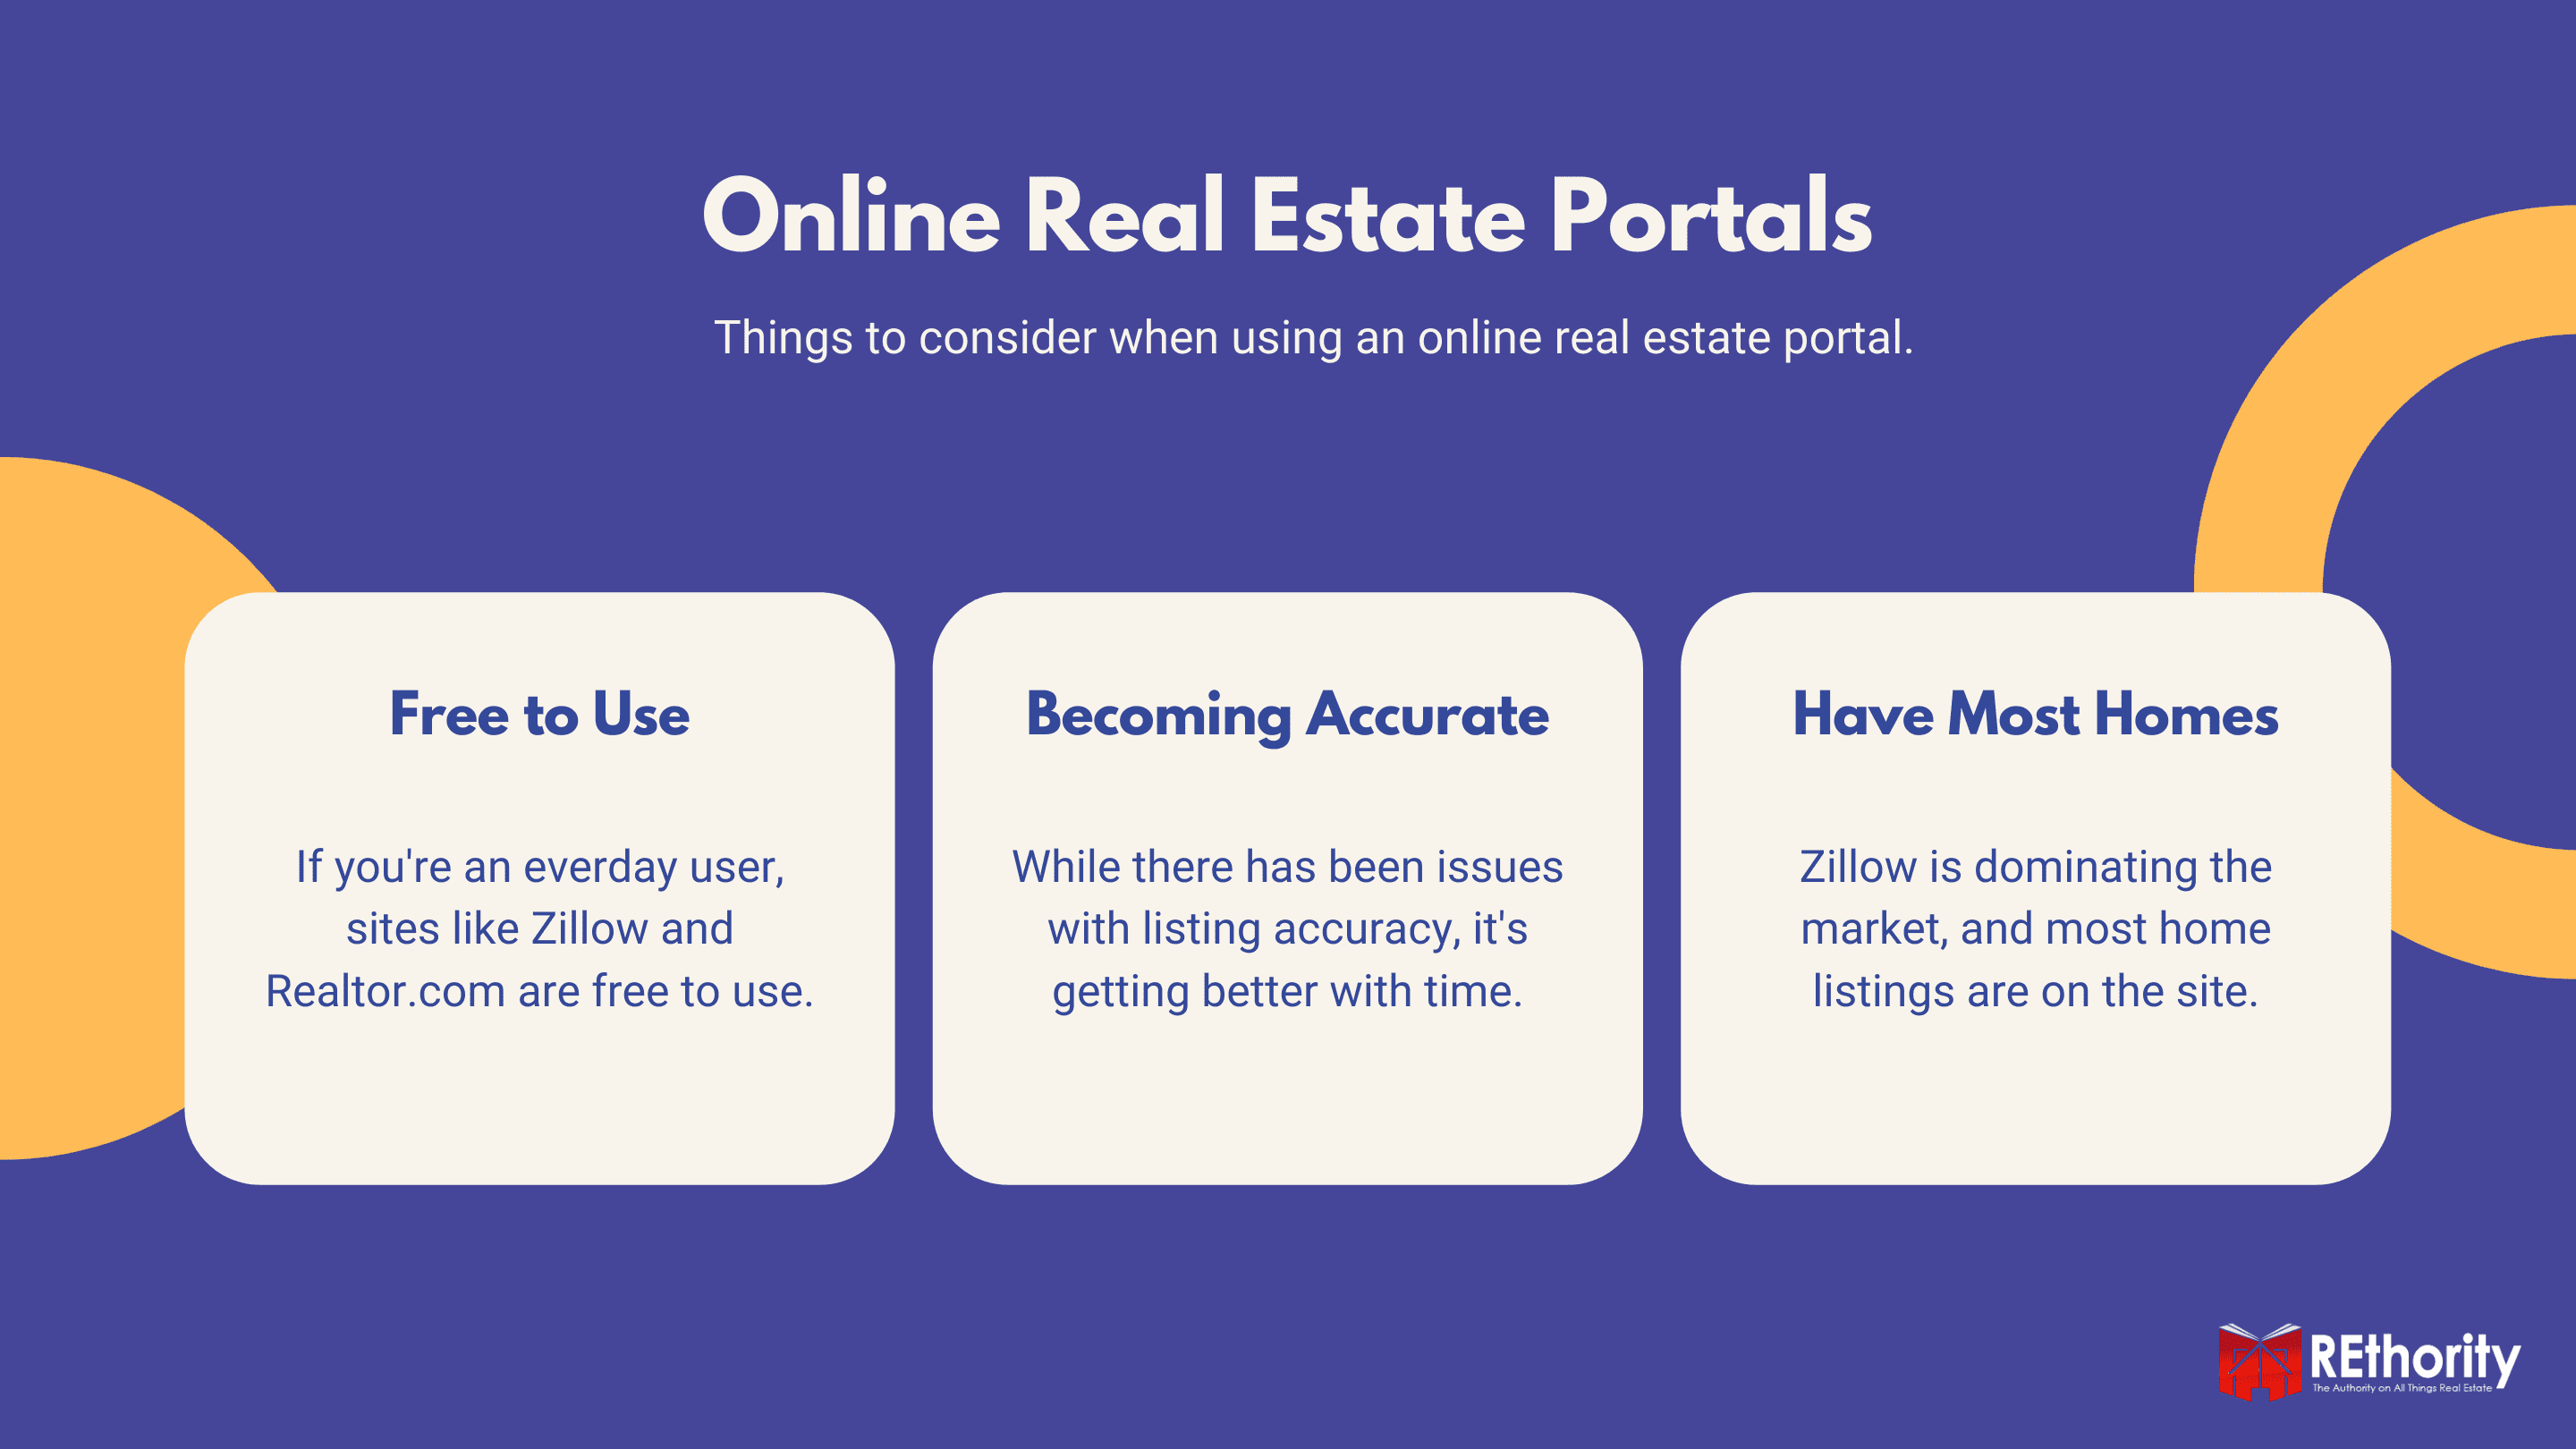 Graphic explaining things to consider when using an online real estate portal to determine how much a home sold for